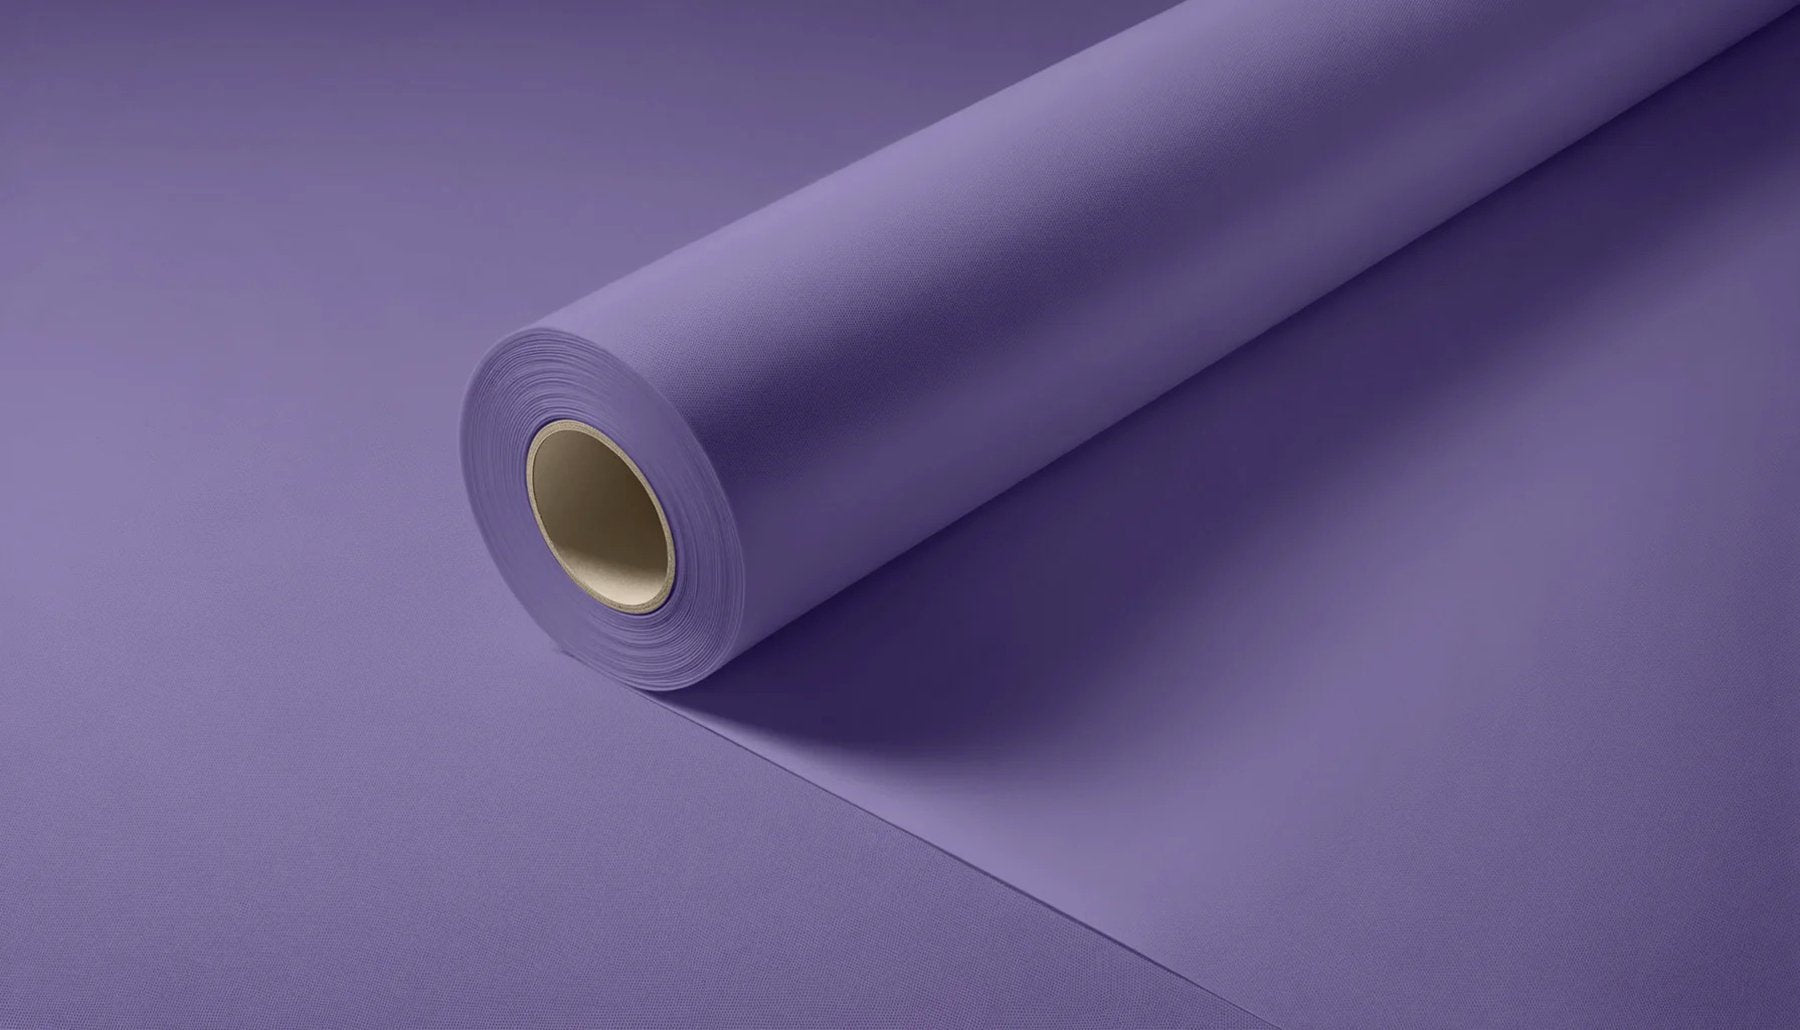 Peel & Stick Removable Re-usable Paint - Color RAL 4005 Blue Lilac - offRAL™ - RALRAW LLC, USA